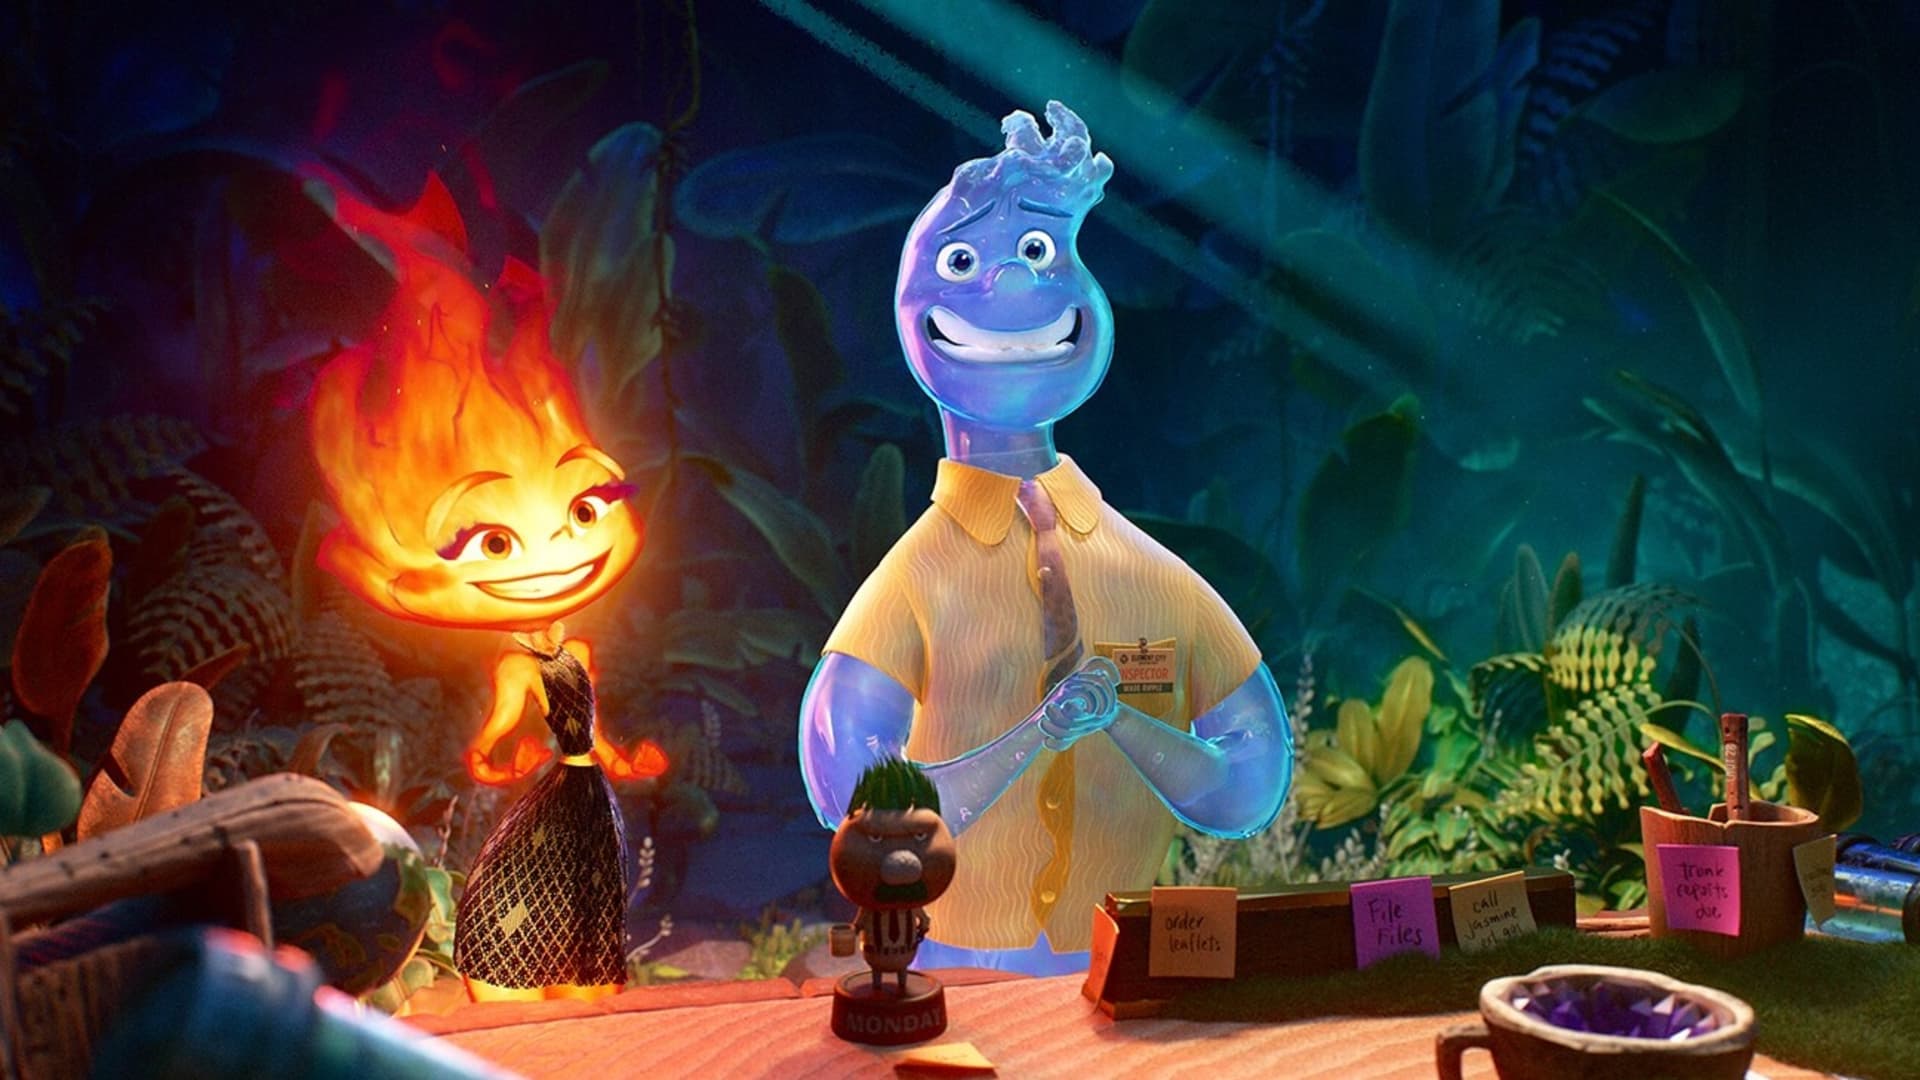 Disney banks on Pixar's Elemental to get out of animation rut - Will it succeed? 13